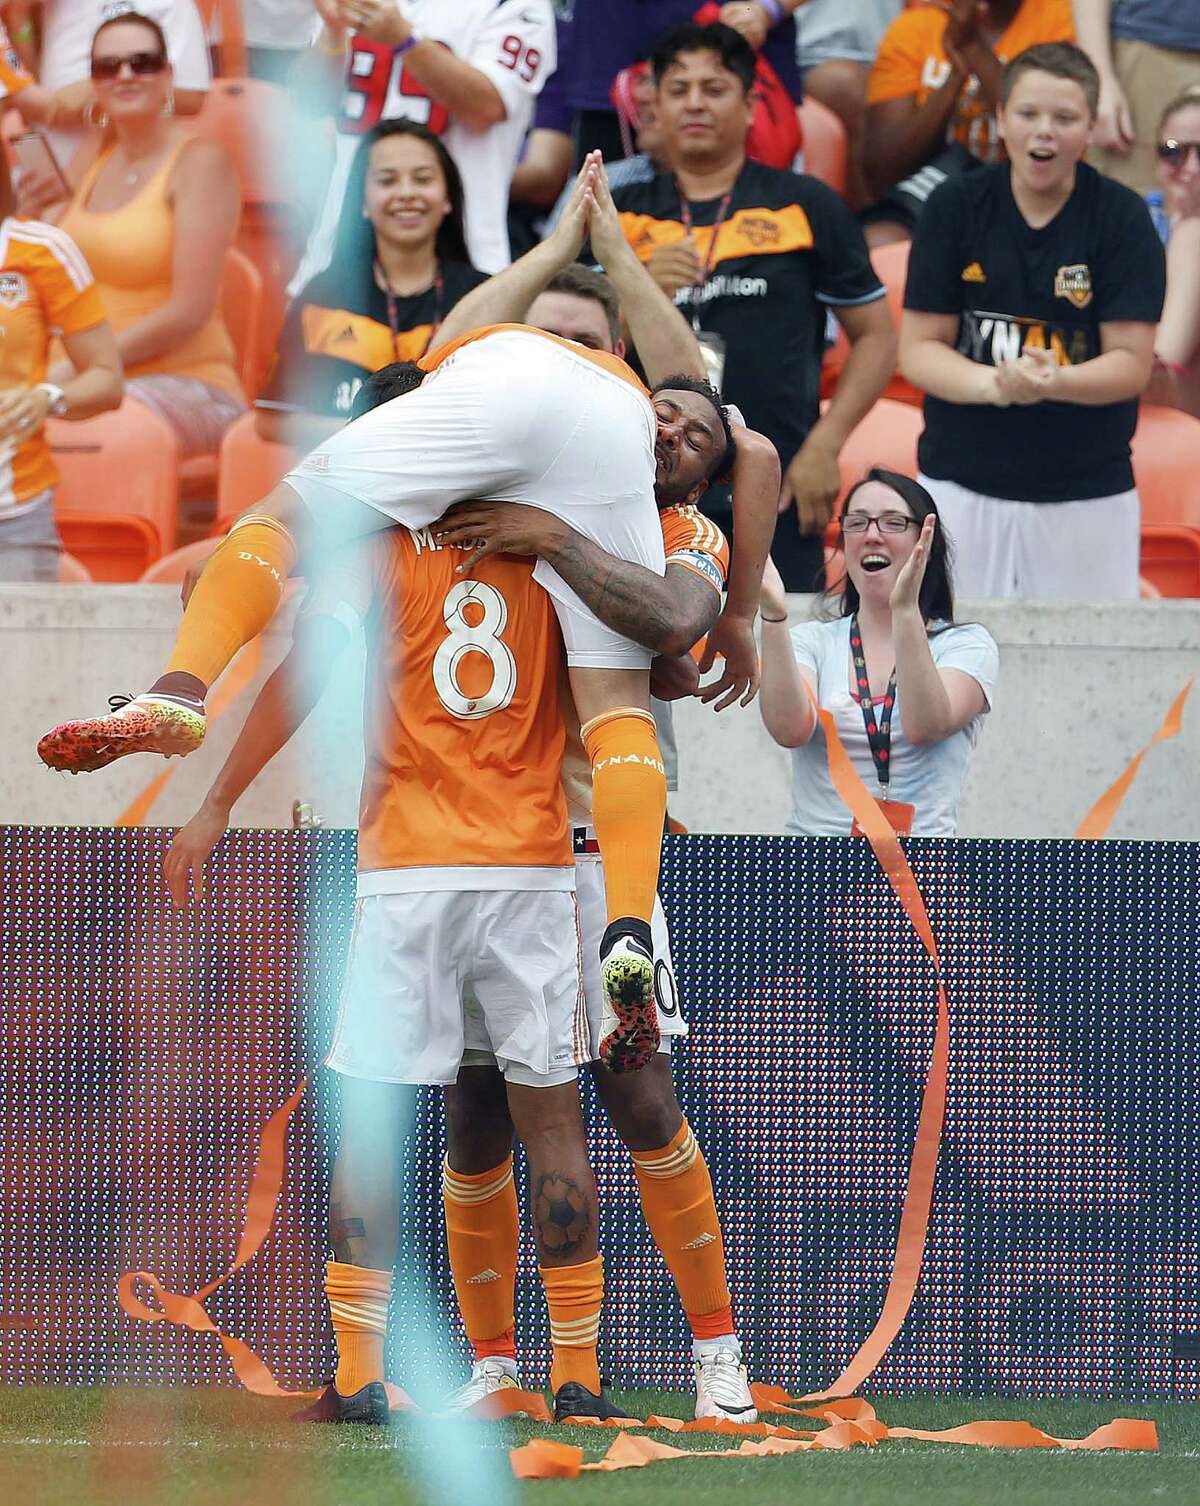 Houston Dynamo forward Erick Torres (9) jumps onto Giles Barnes (10) and Cristian Maidana (8) after Barnes scored a goal during the second half of an MLB soccer game at BBVA Compass Stadium, Sunday, May 15, 2016, in Houston. Dynamo won the game 1-0.